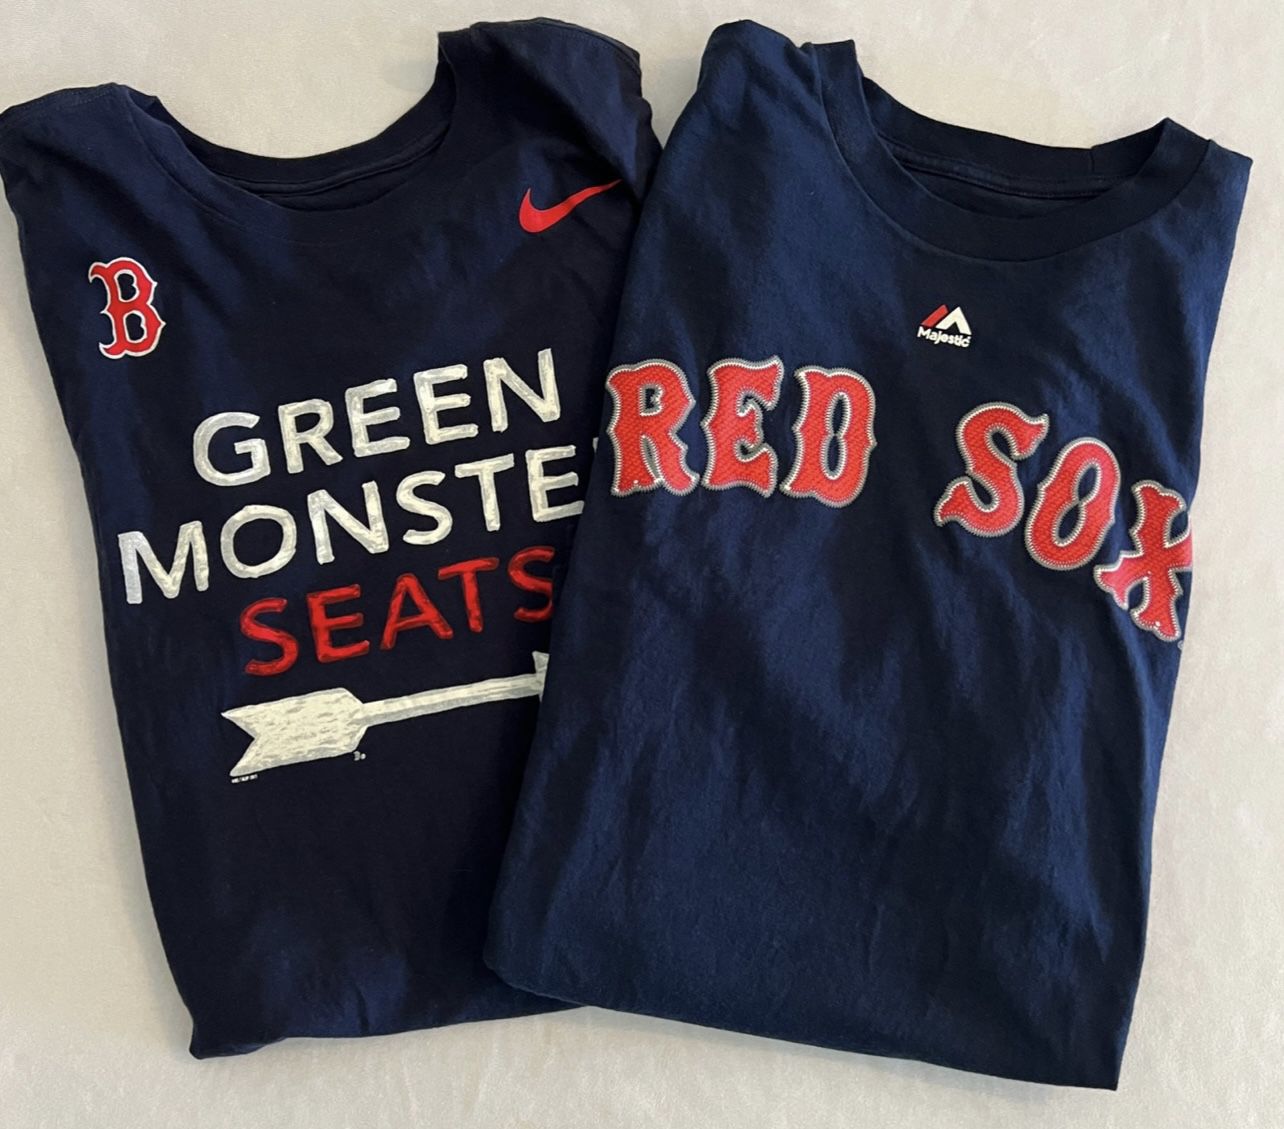 boston red sox shirts for sale